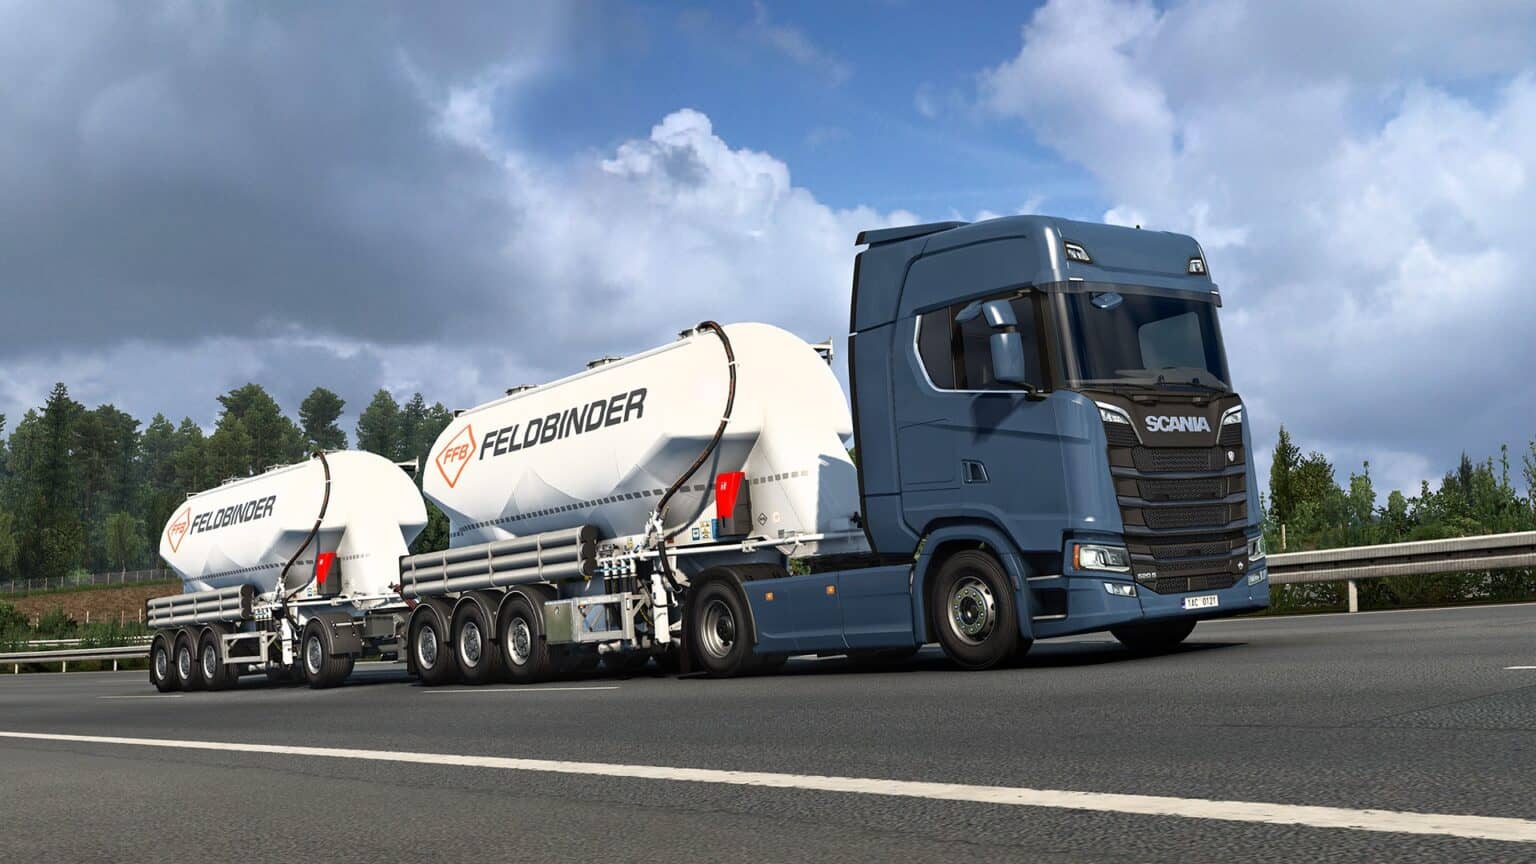 Euro Truck Simulator Partners With Iconic Feldbinder Brand In Latest Dlc Traxion Gg